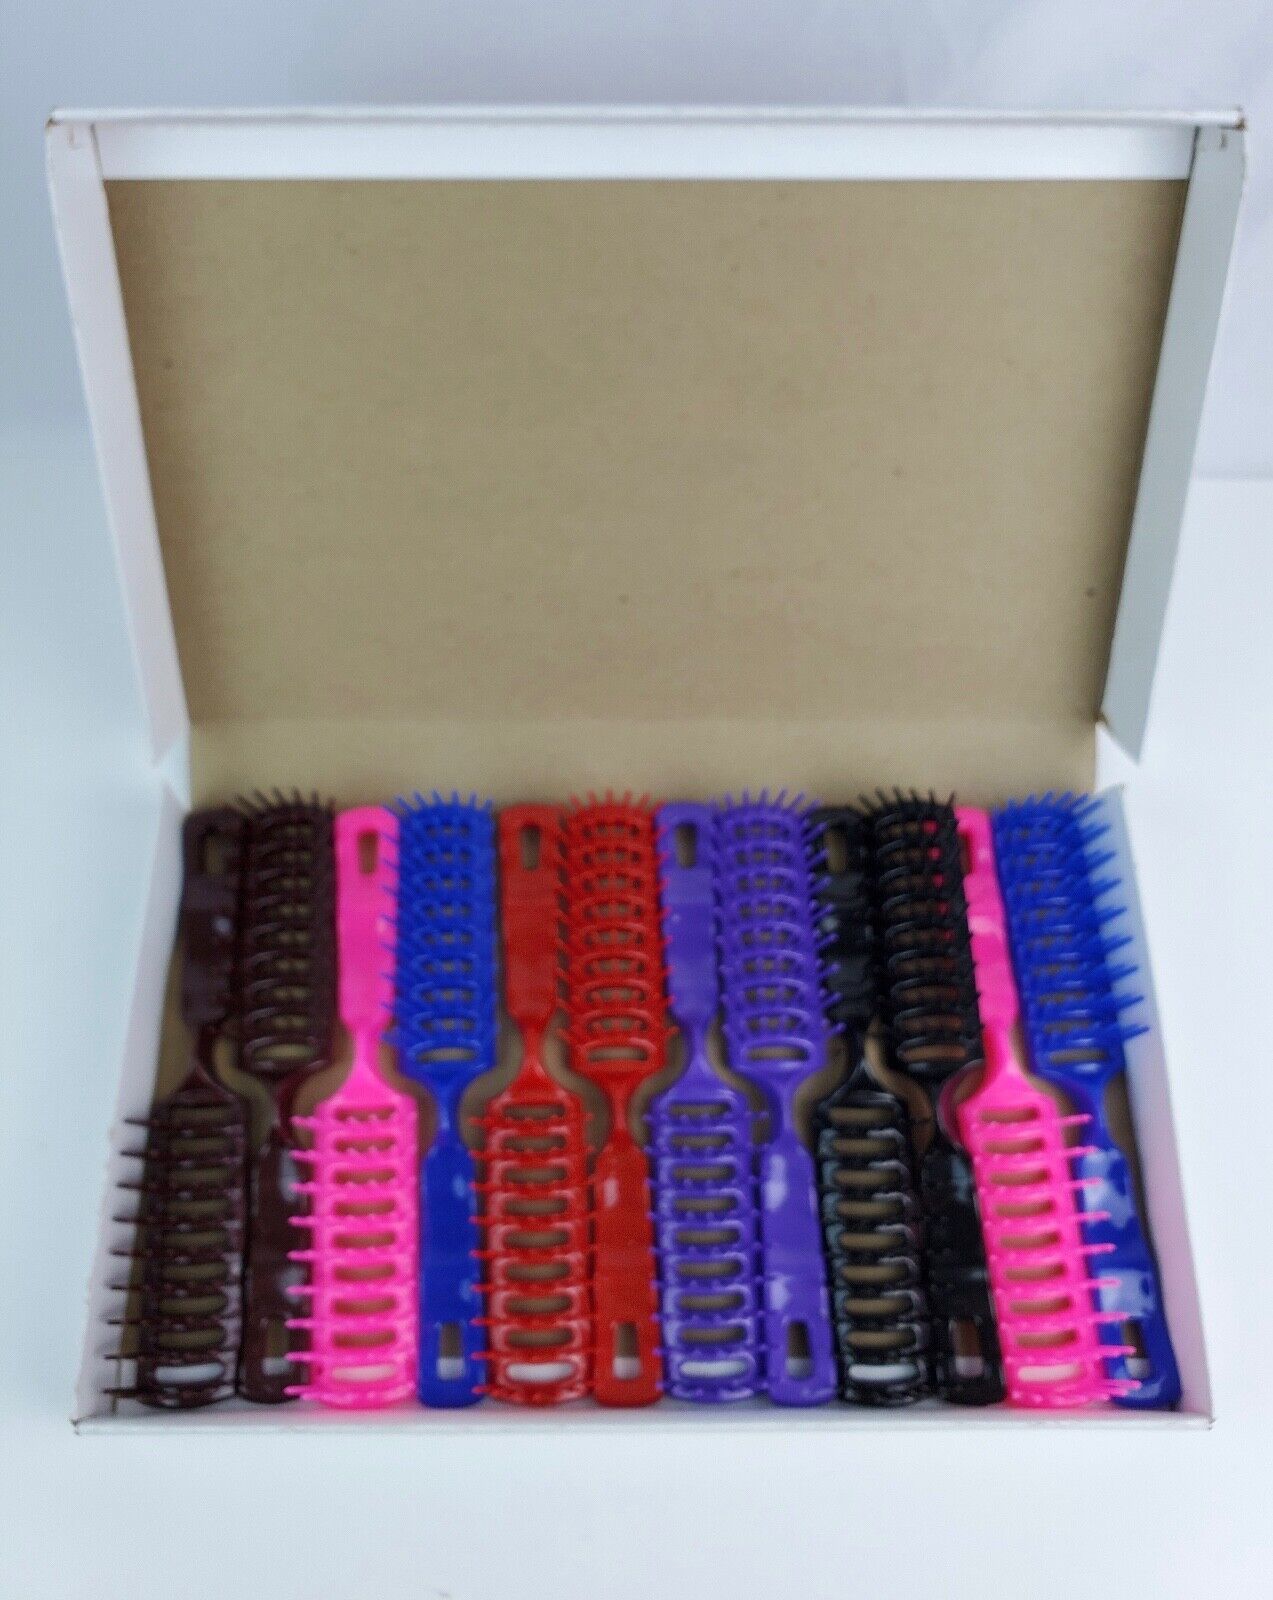 NOS Jet-Flow Turbo vented plastic hair brush full case of 12 Colorful Pink Blue - $55.43